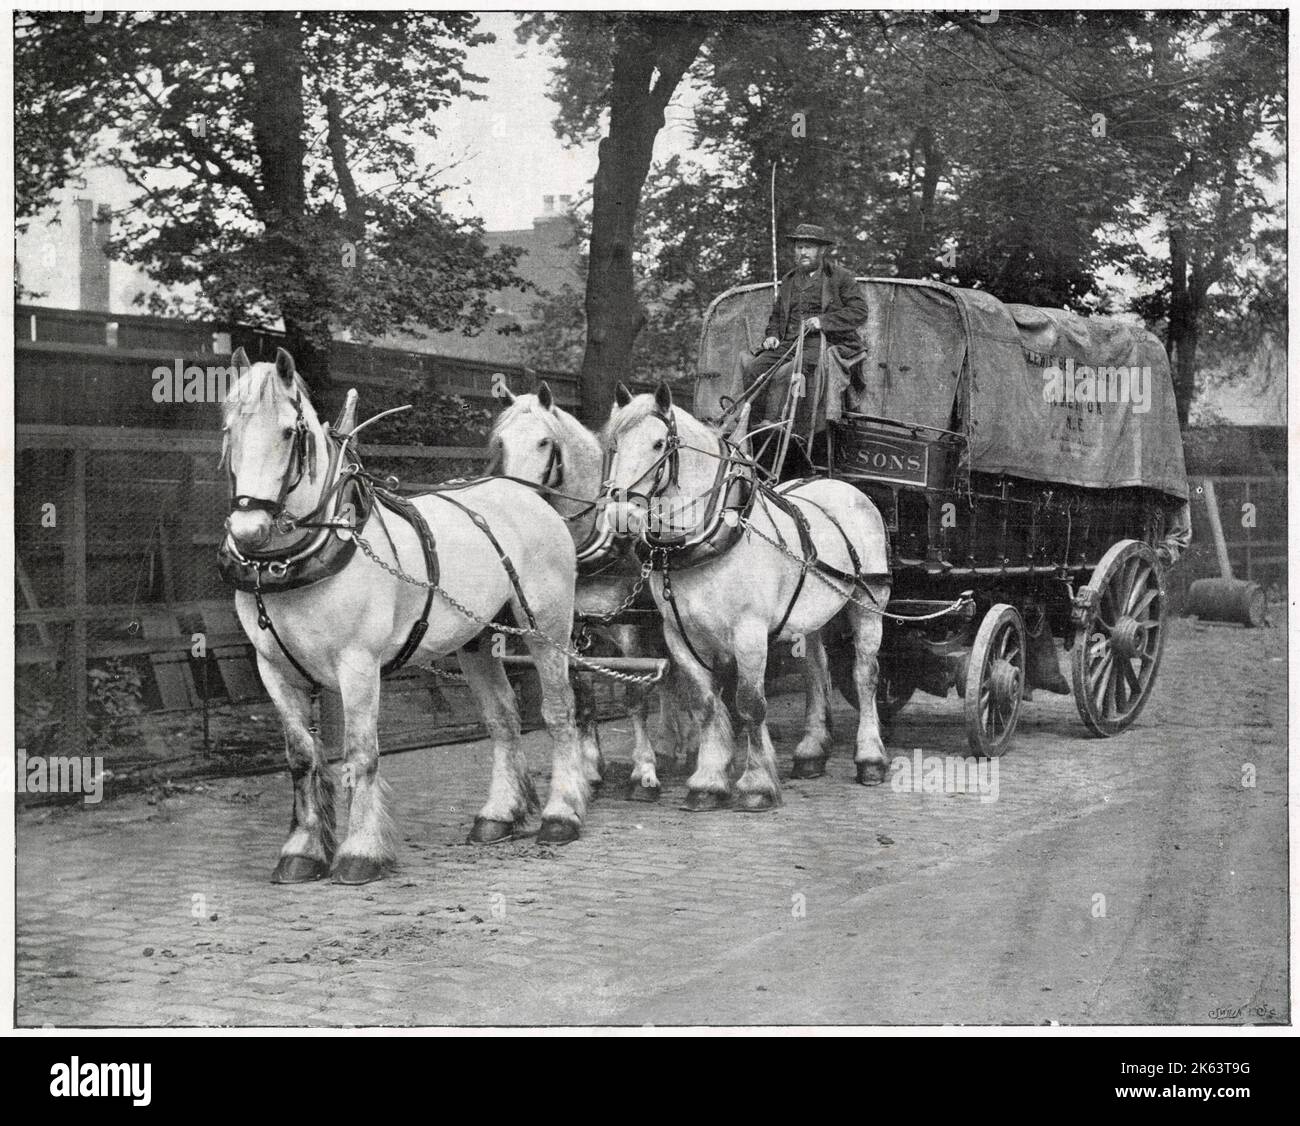 Berger and Sons of Homerton, London, showing their transportation, horse and cart in the trading in streets of East London. Stock Photo